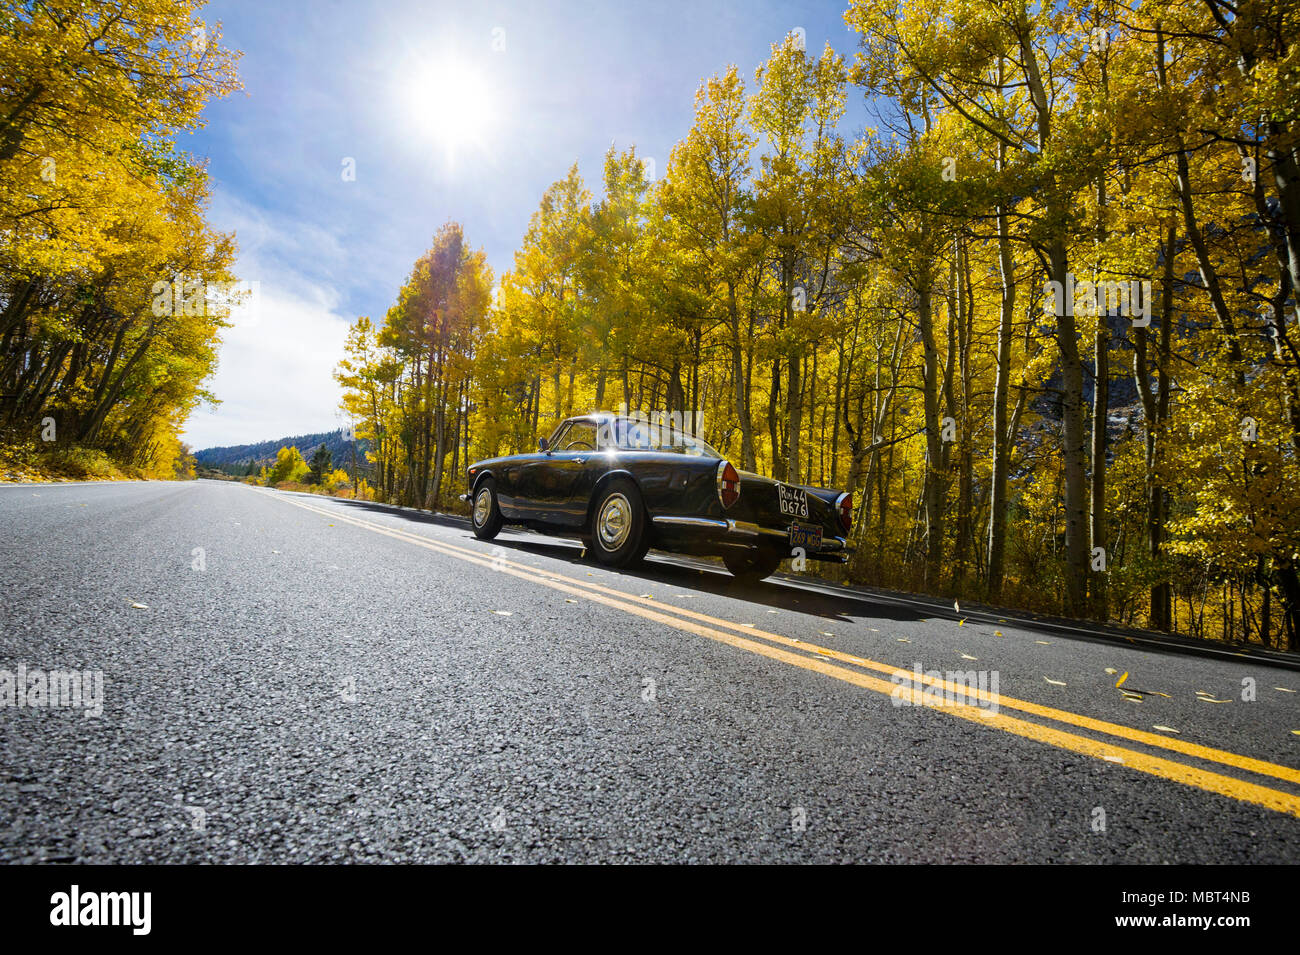 A 1961 Lancia Flaminia car drives through Rock Creek Canyon surrounded by fall color in the Eastern Sierra near Toms Place, California. Stock Photo